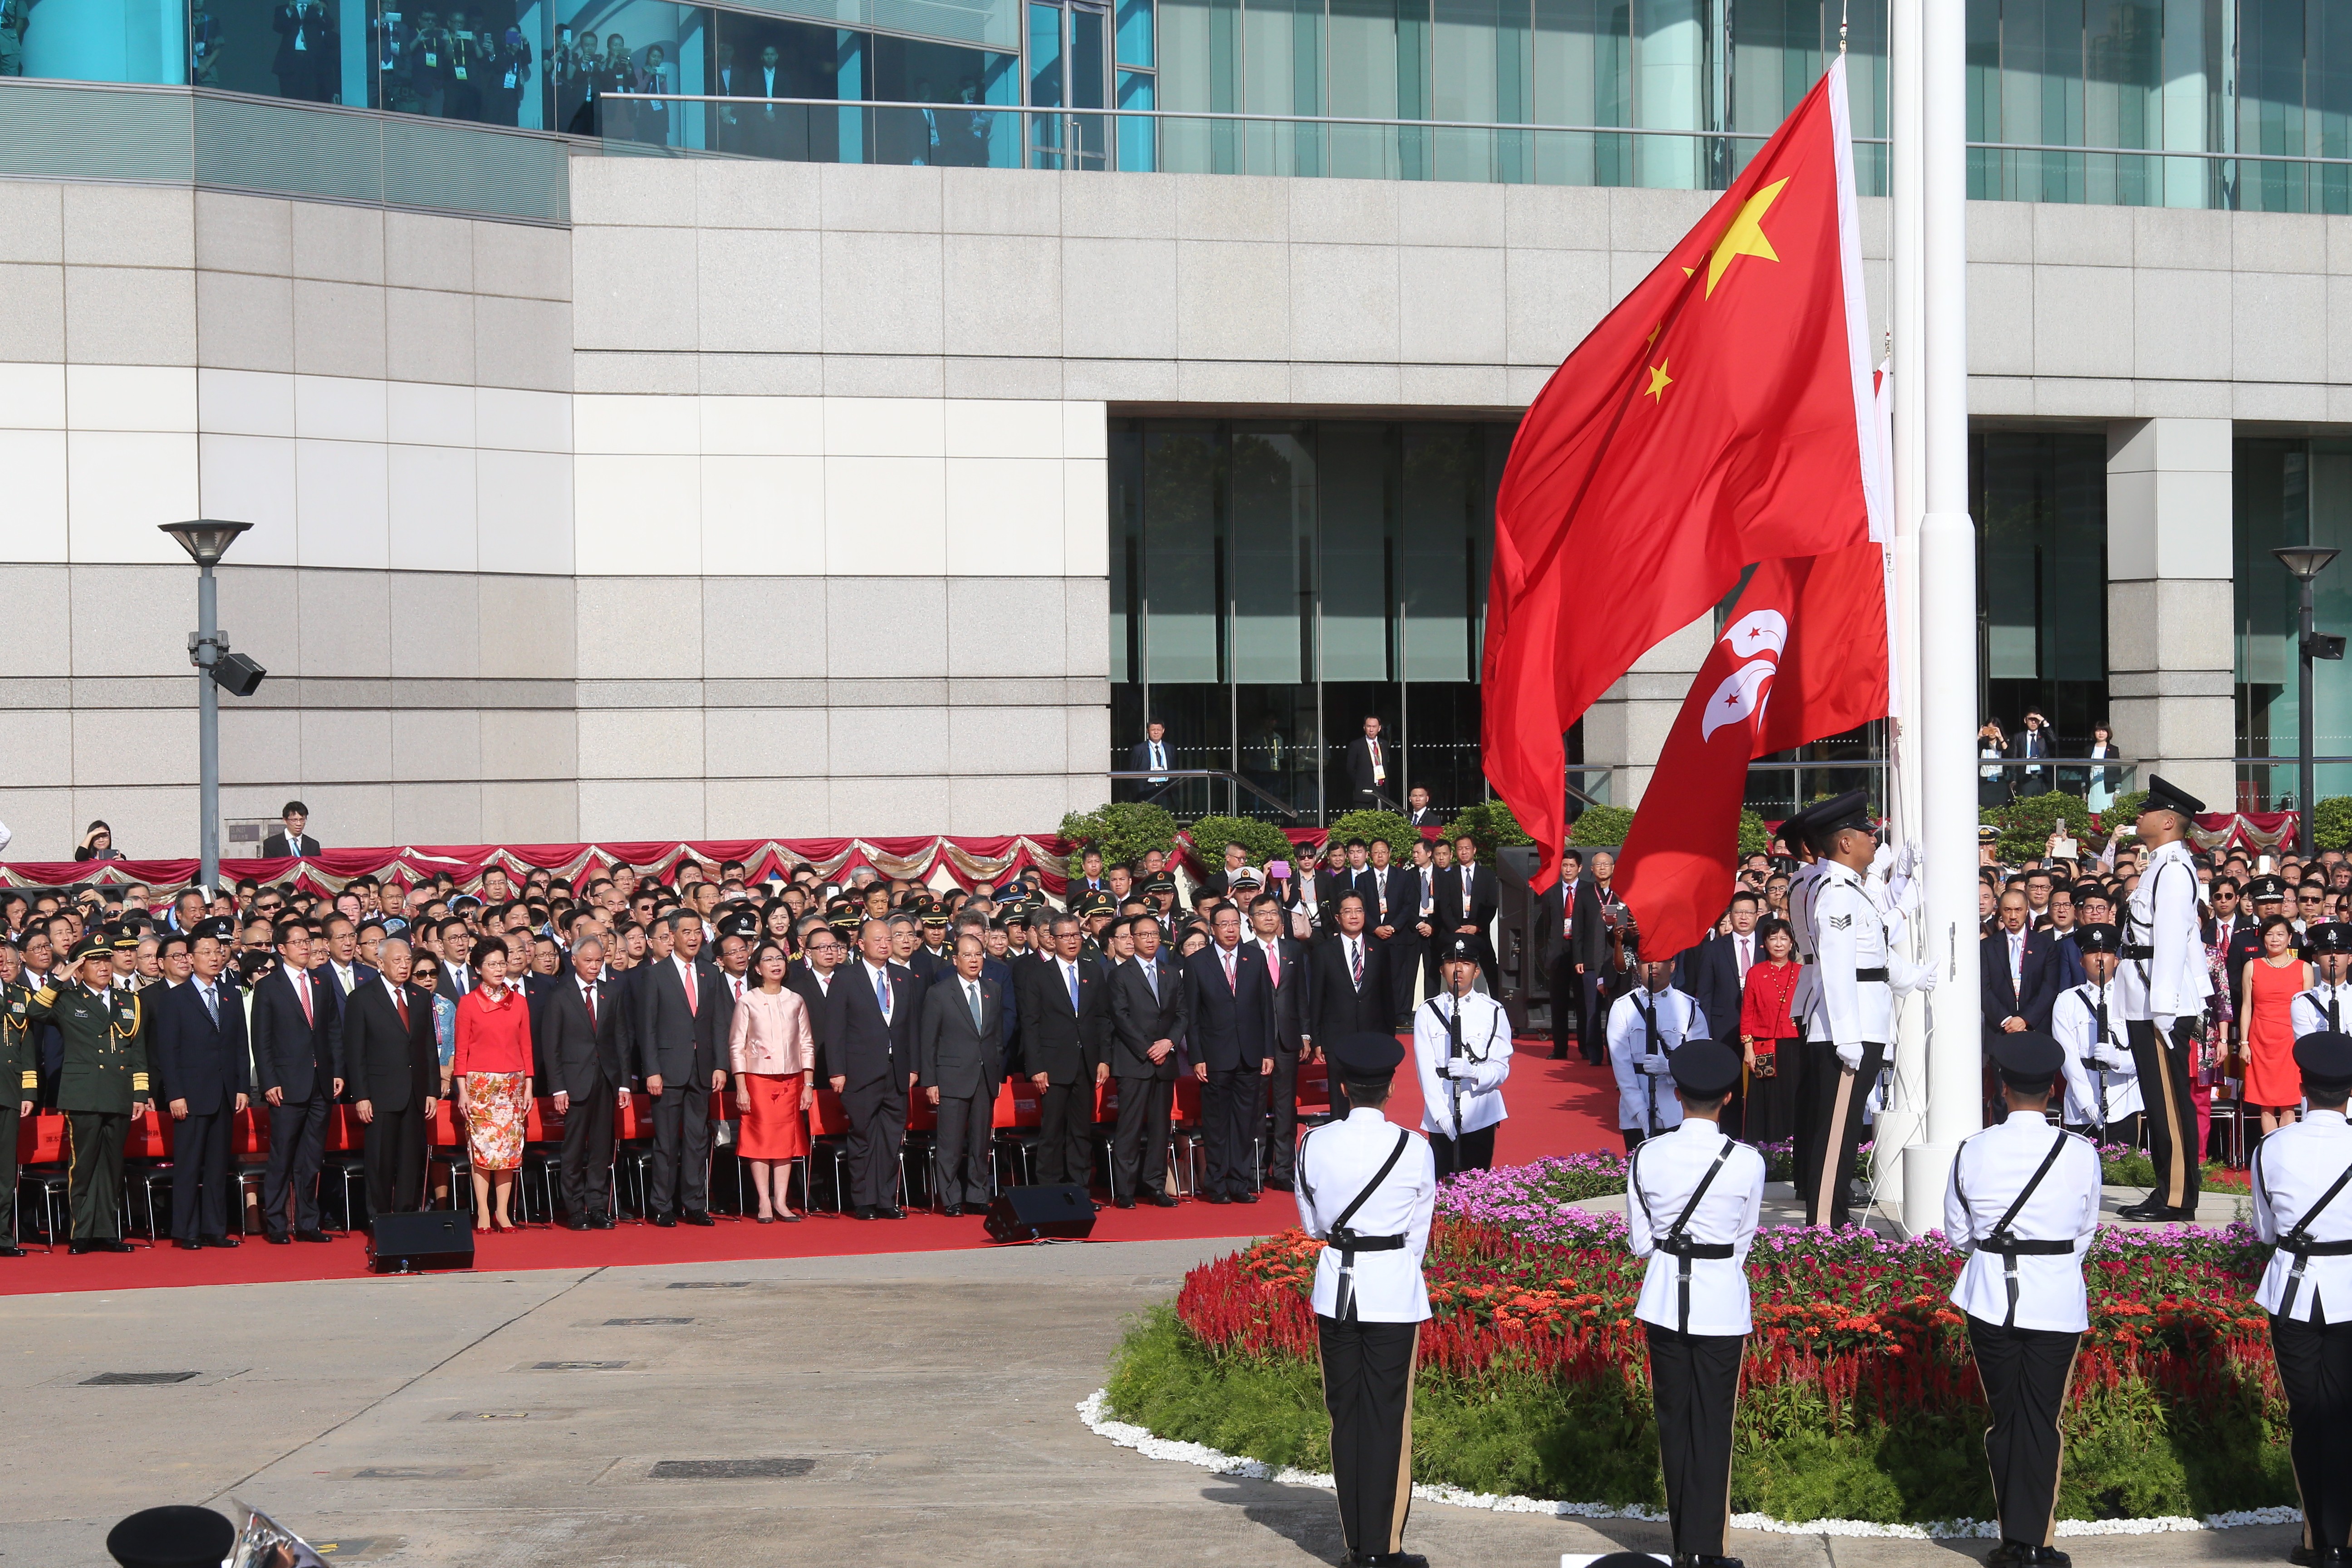 Carrie Lam led the flag-raising ceremony at Golden Bauhinia Square. Photo: K. Y. Cheng